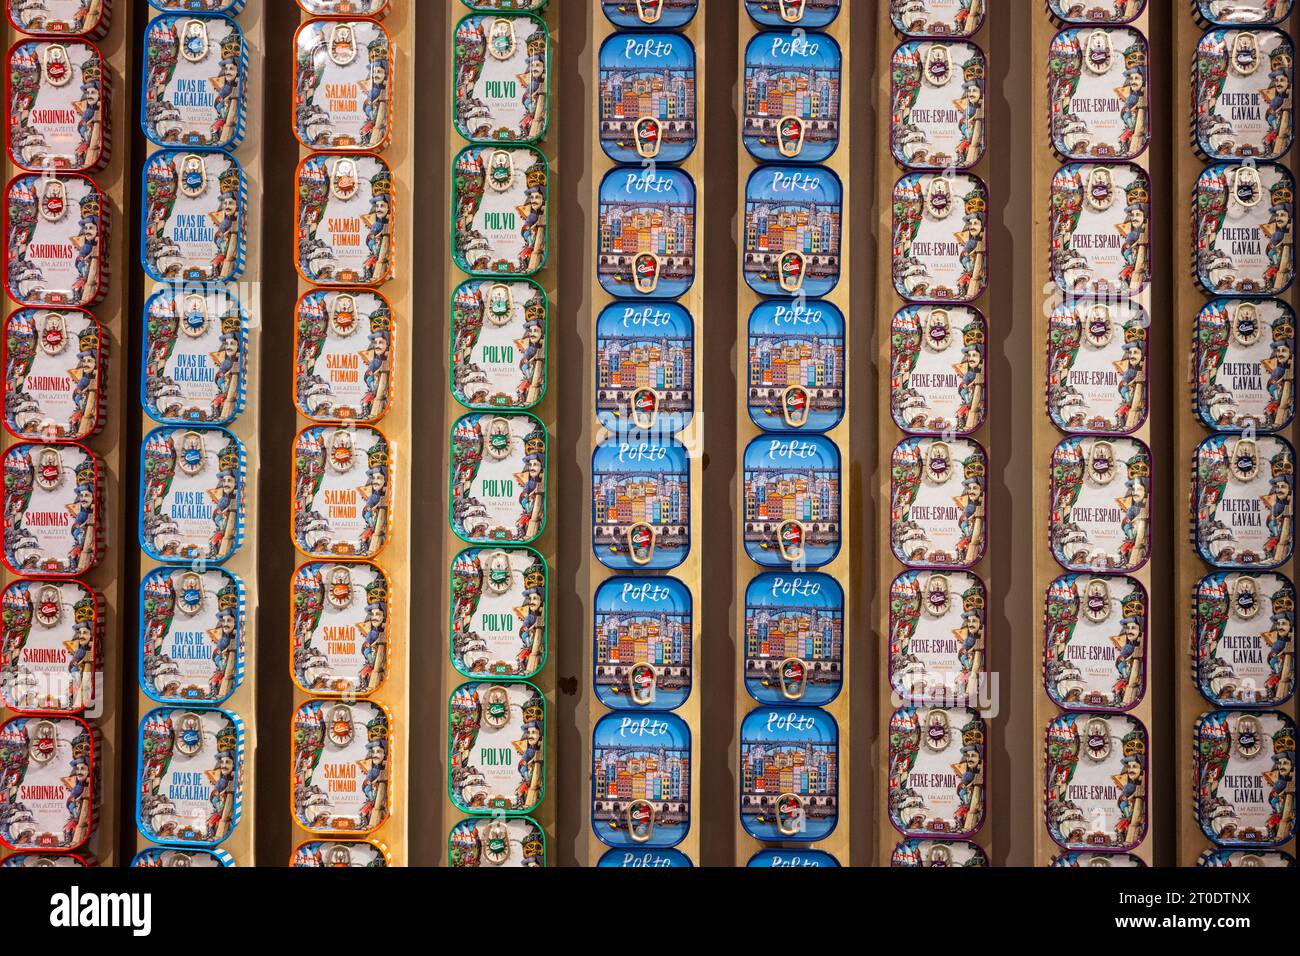 Portuguese canned sardines displayed in Comur shop in Porto, Portugal Stock Photo